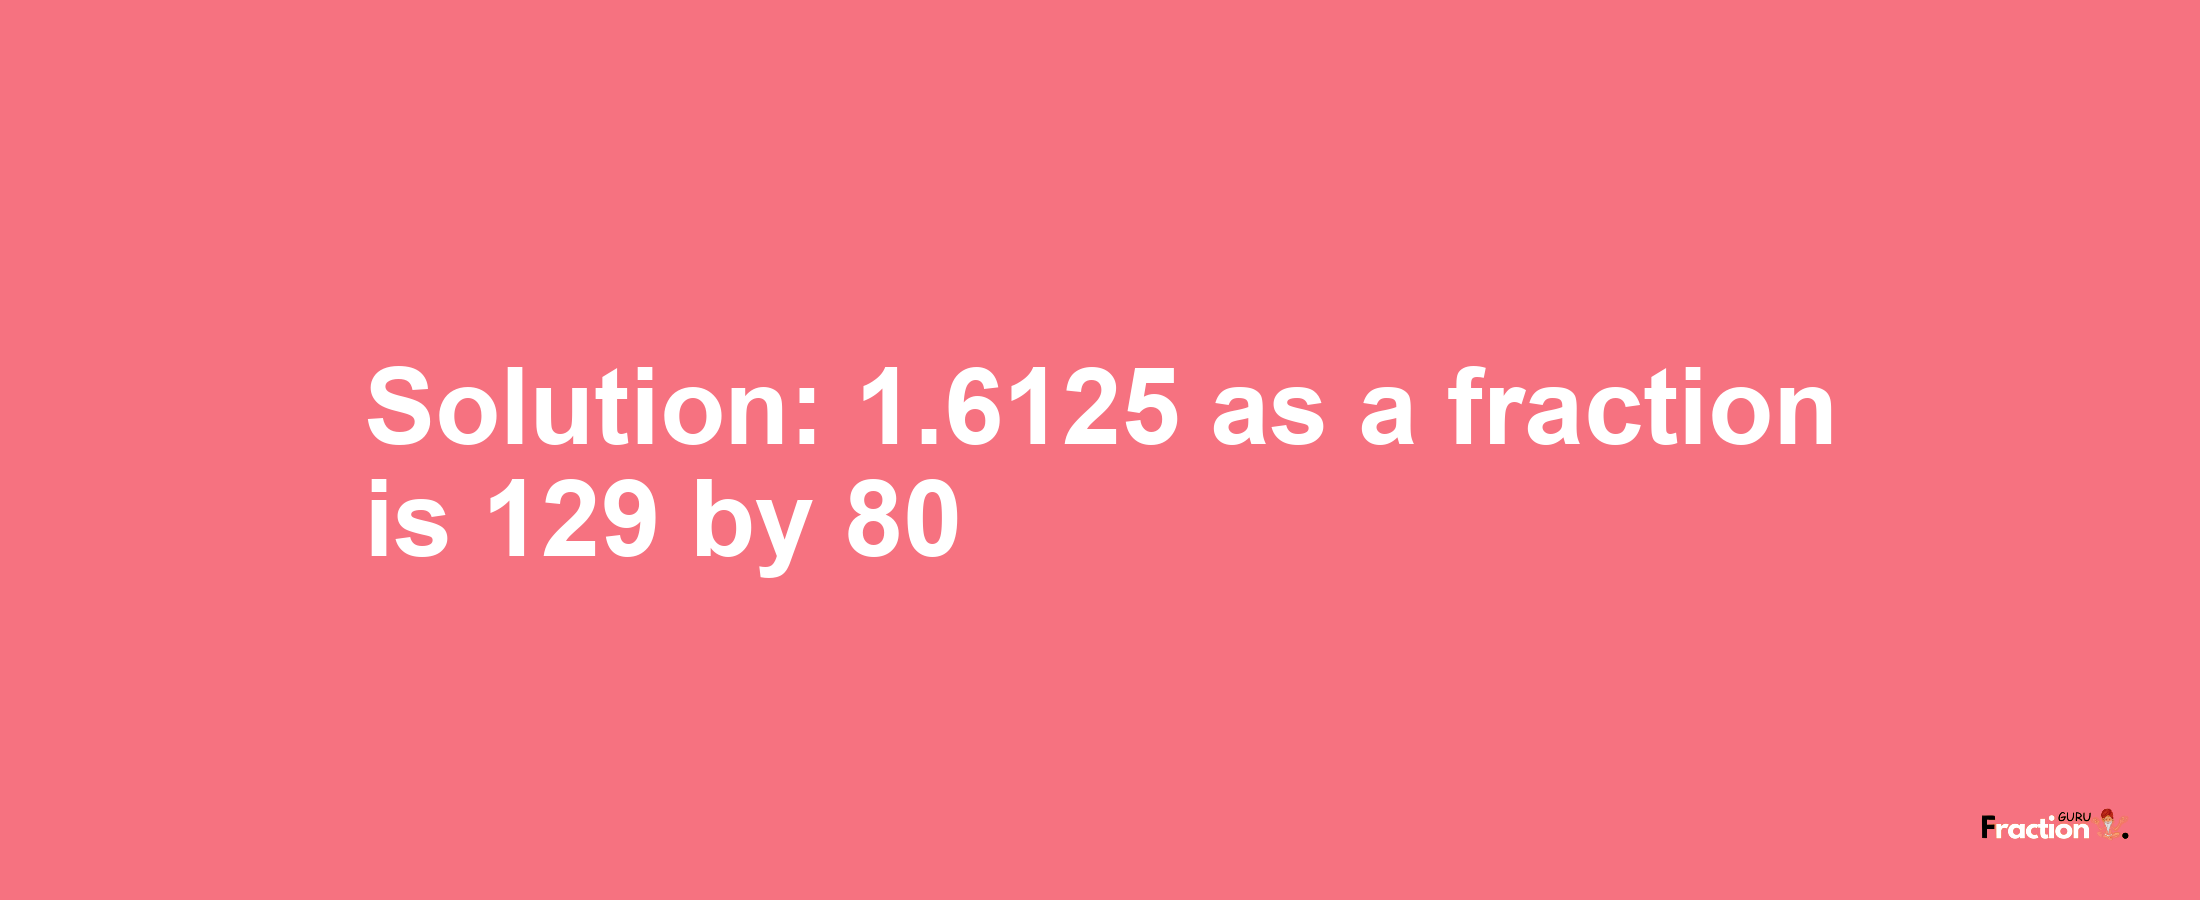 Solution:1.6125 as a fraction is 129/80